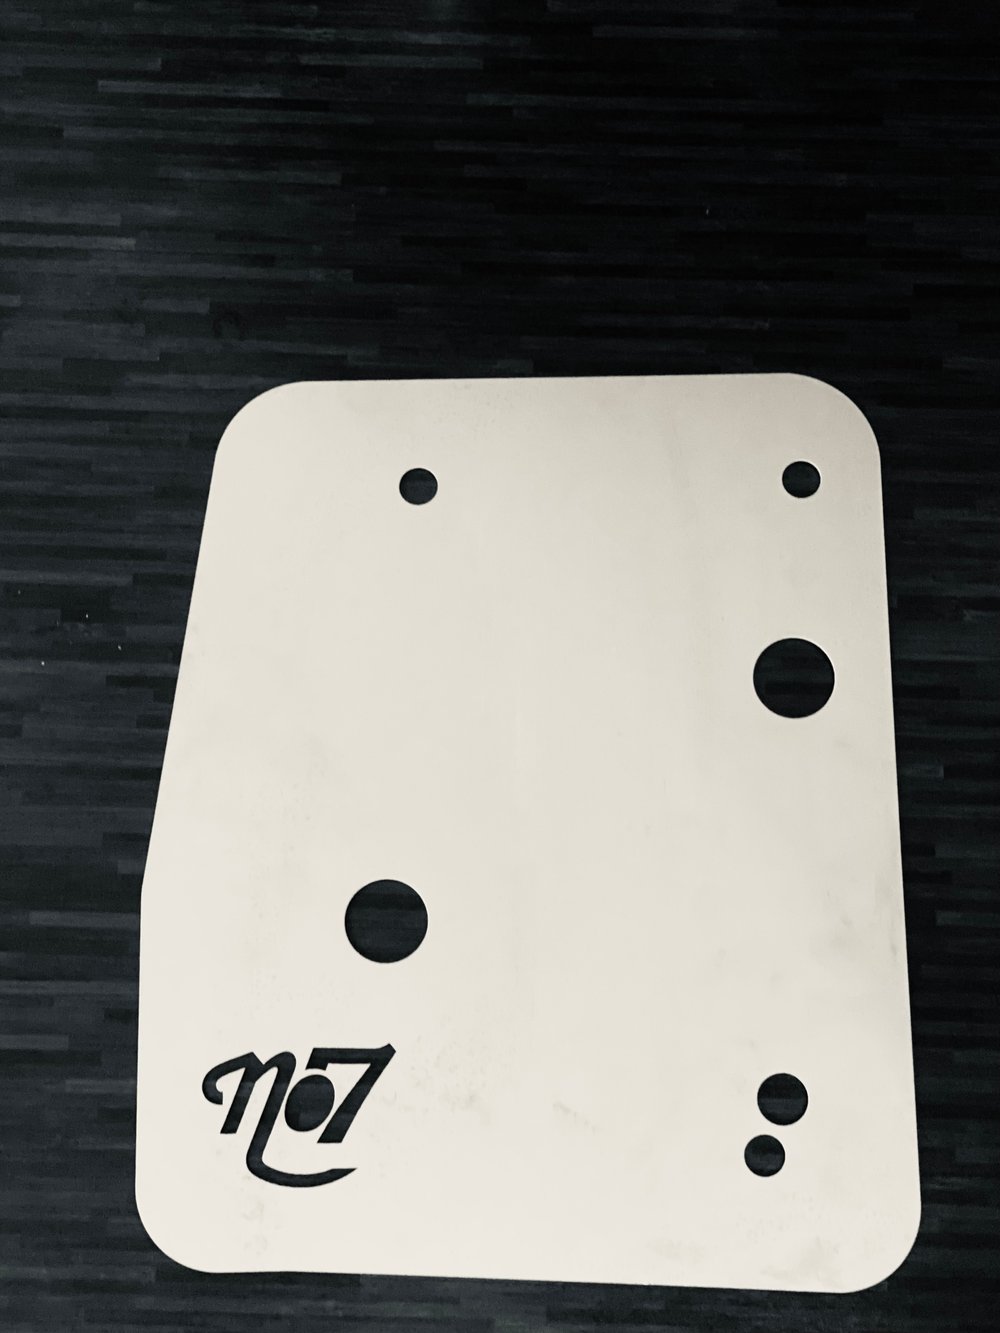 Image of Clio 197/200 NO7 V6 Airbox Mounting Plate  